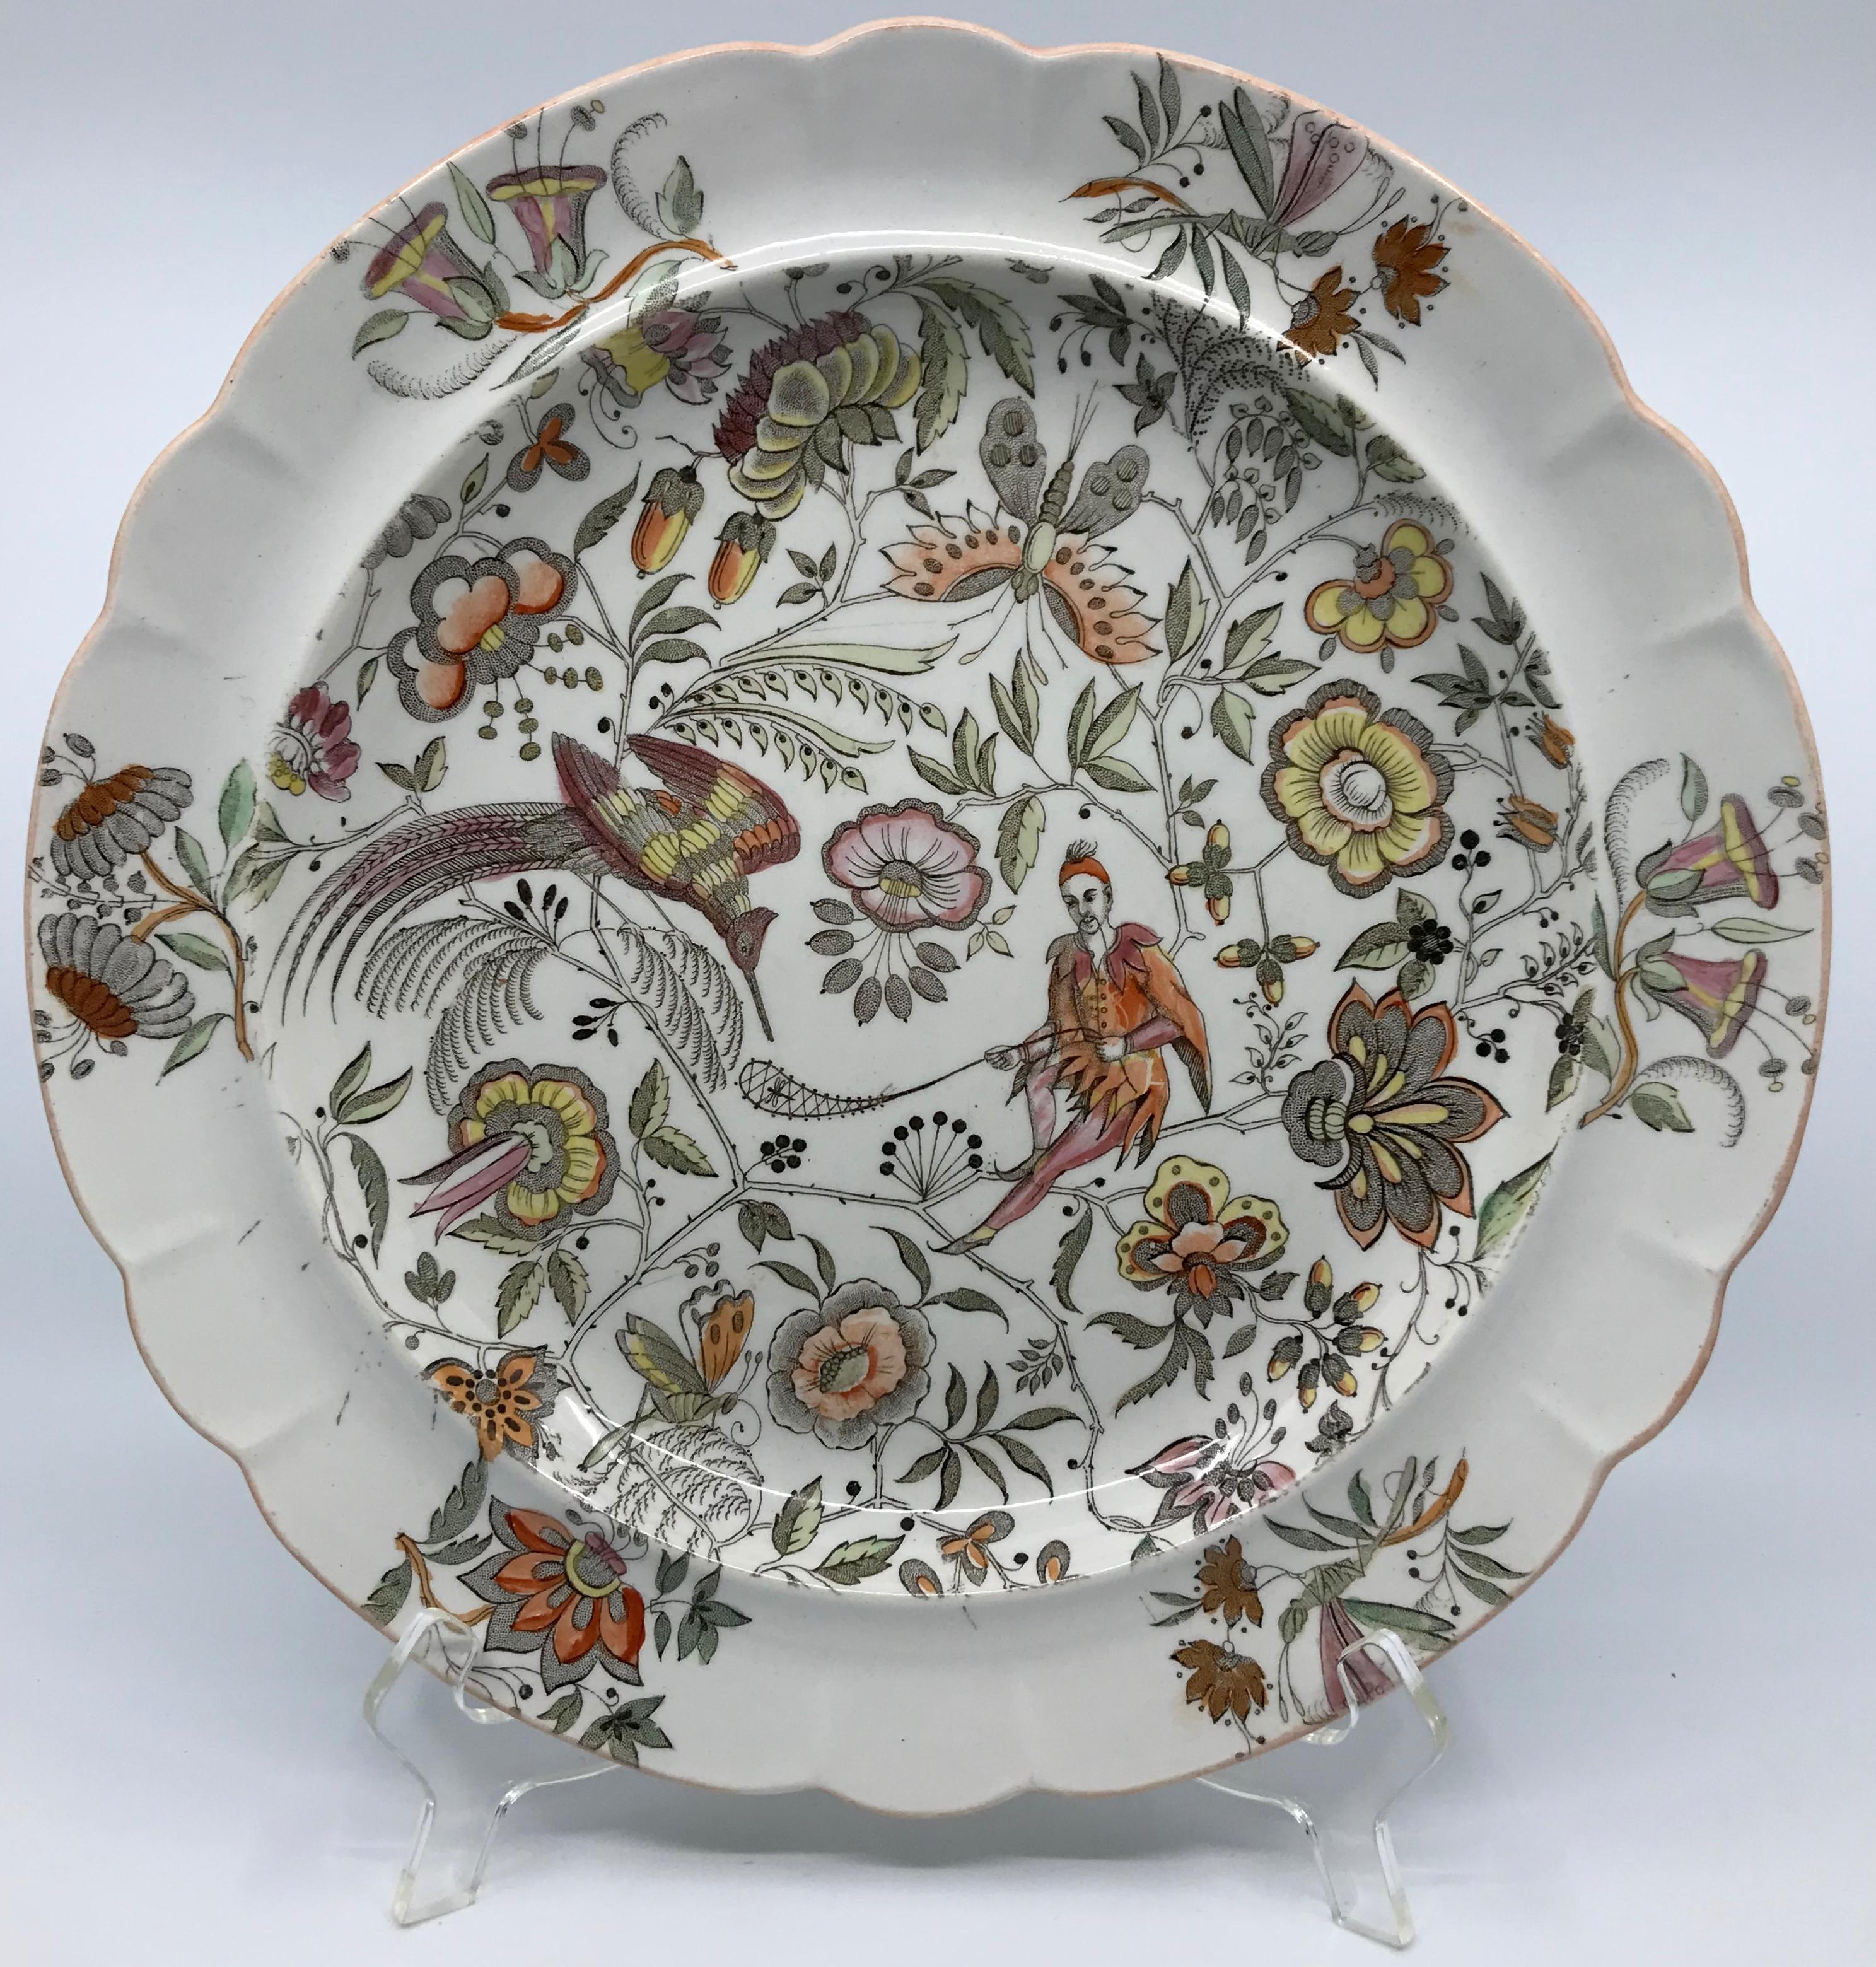 Wedgwood chinoiserie shallow-bowled plate with lobed peach slip edge. Fantastical rose apricot, peach and pale yellow and green decoration with fanciful oriental figure proffering a dragonfly to a long-billed bird surrounded by butterflies and